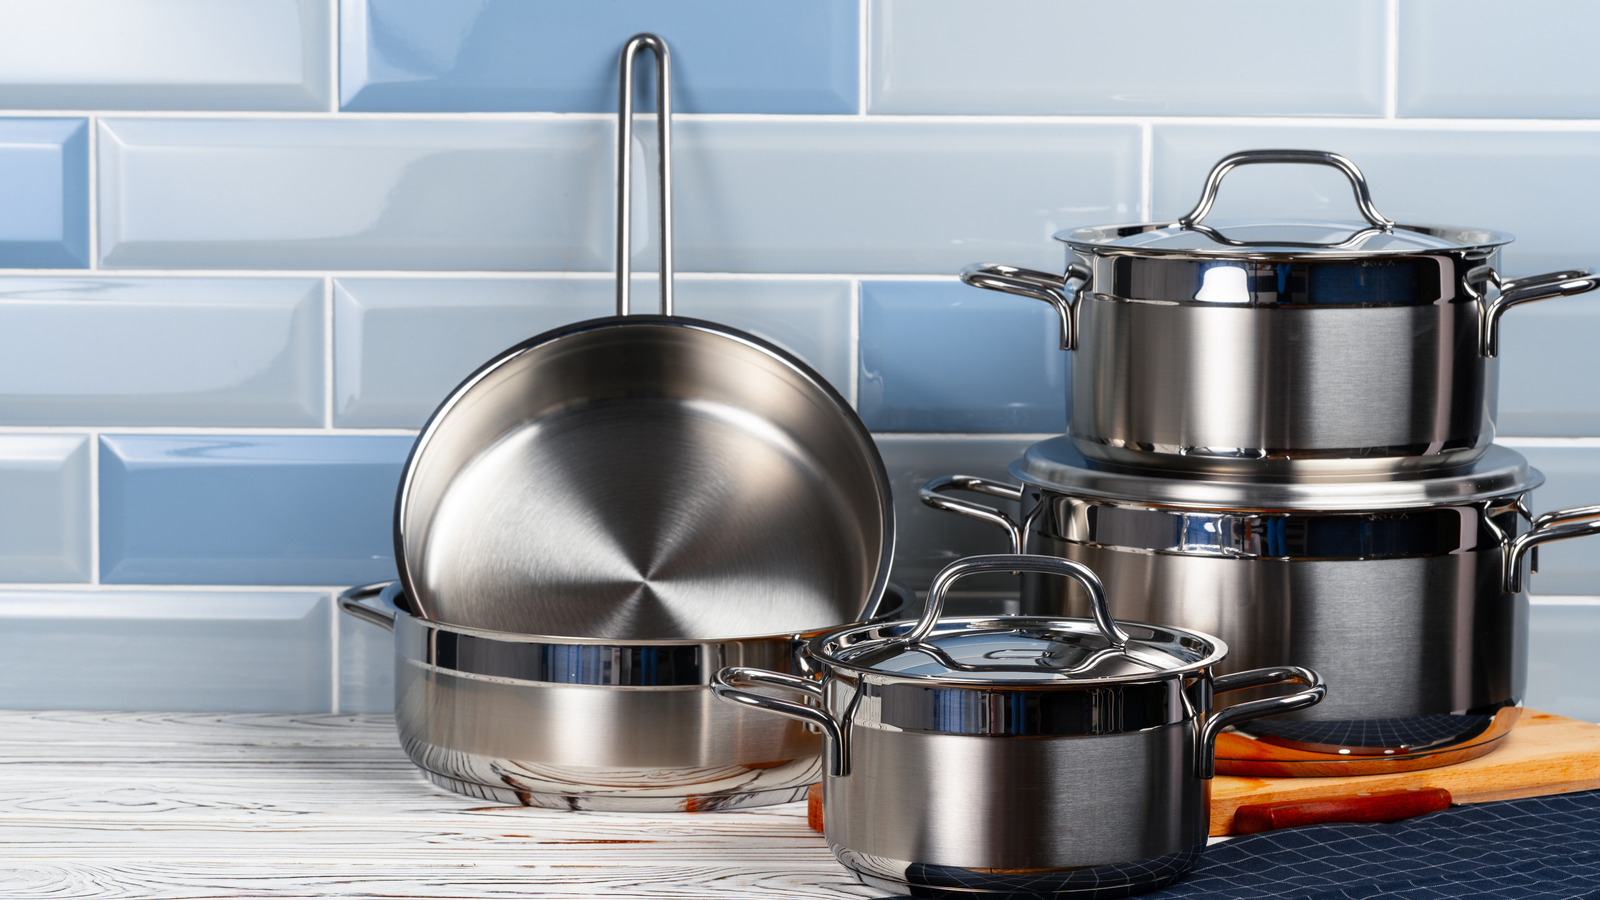 Deals on Legend Stainless Steel Cookware Set, Compare Prices & Shop Online